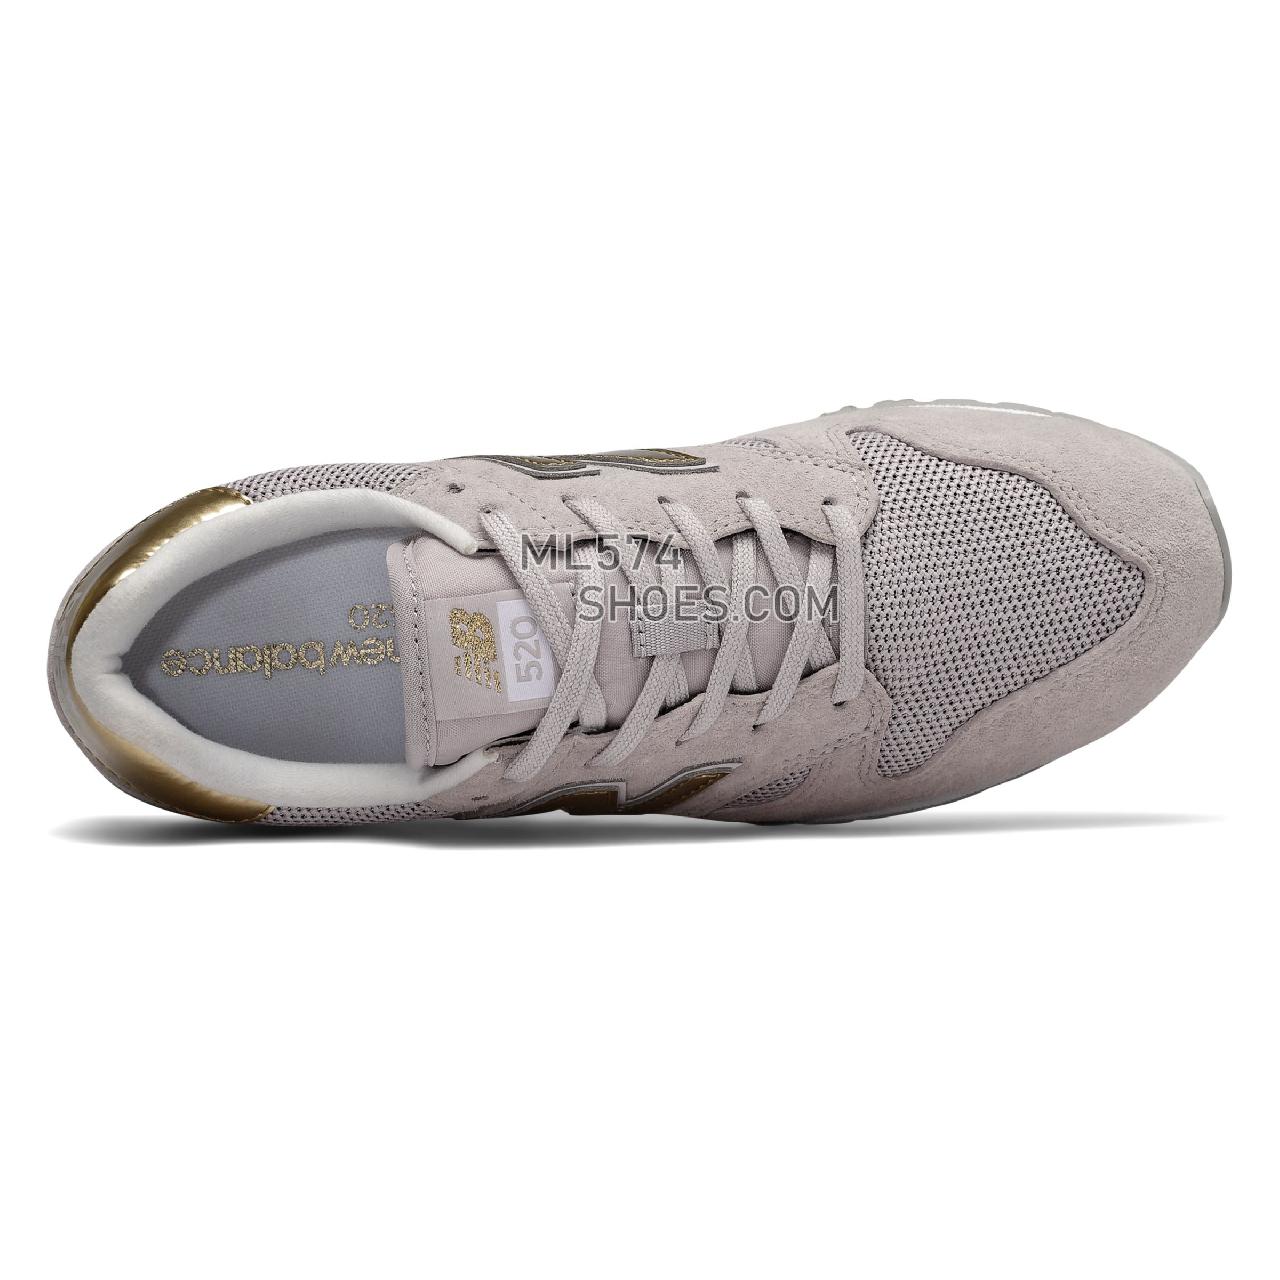 New Balance 520 - Women's Classic Sneakers - Light Cashmere with Classic Gold - WL520GDC